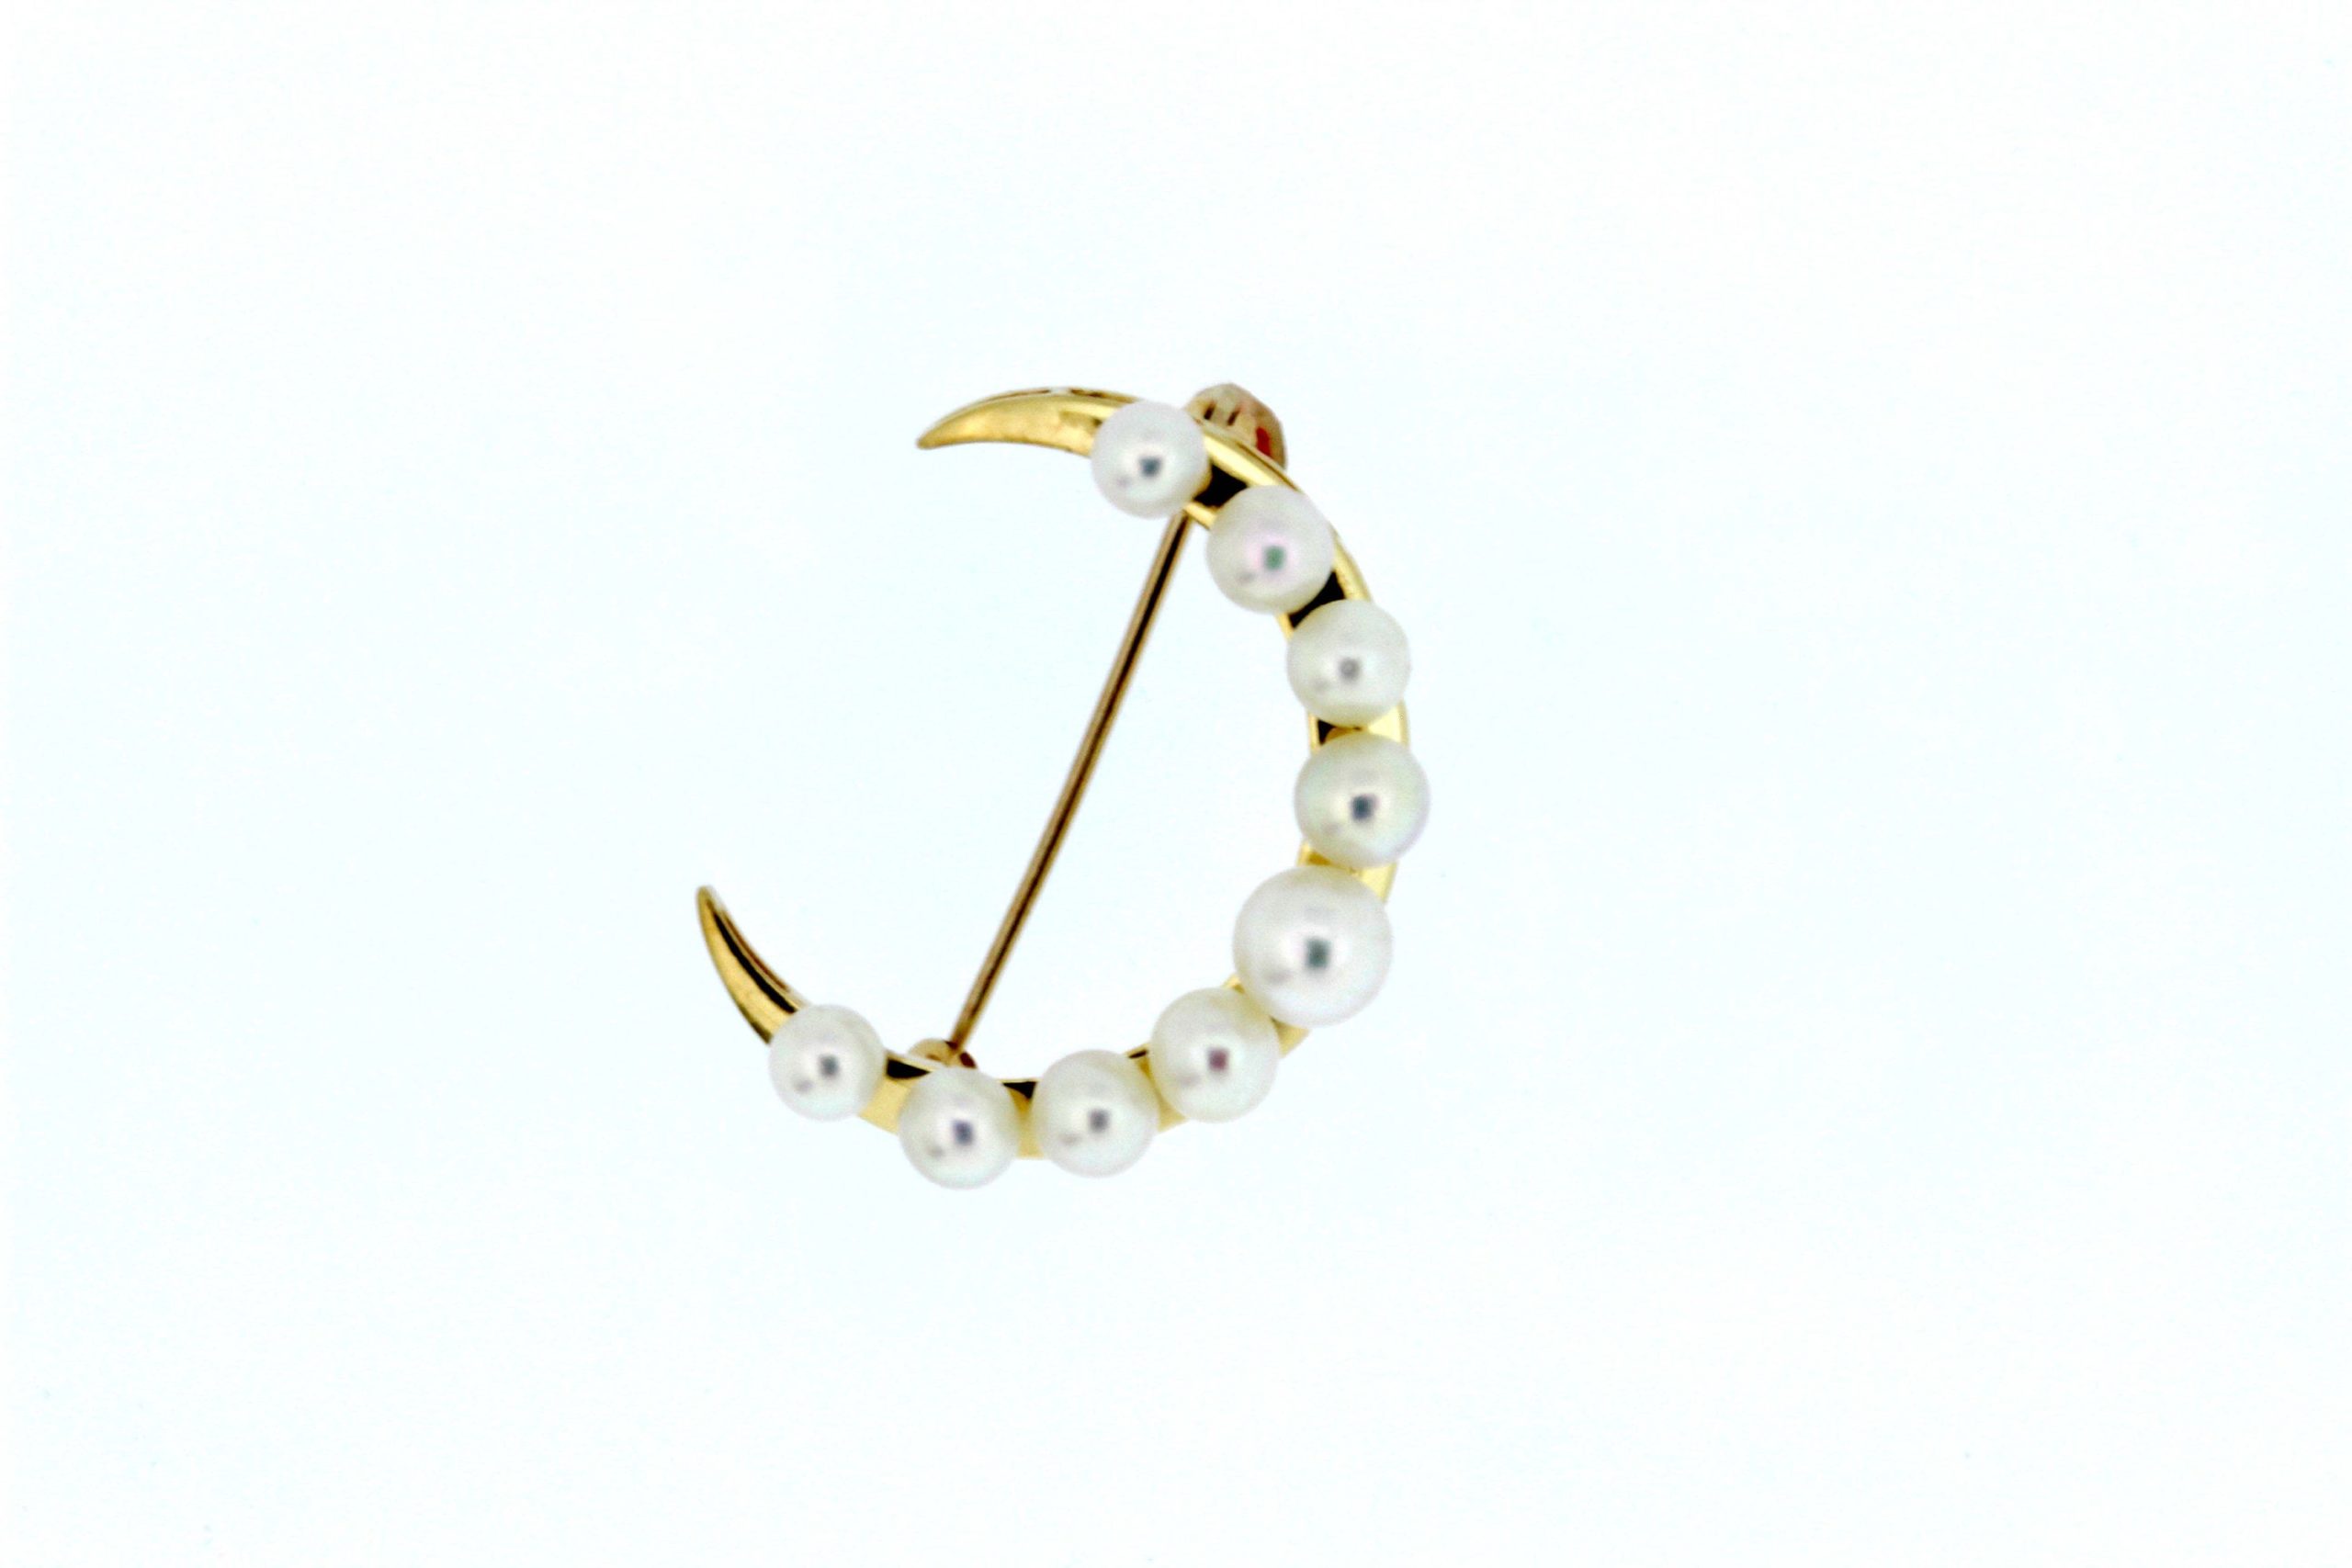 Market Square Jewelers Pearl Crescent Moon Gold Brooch Pin